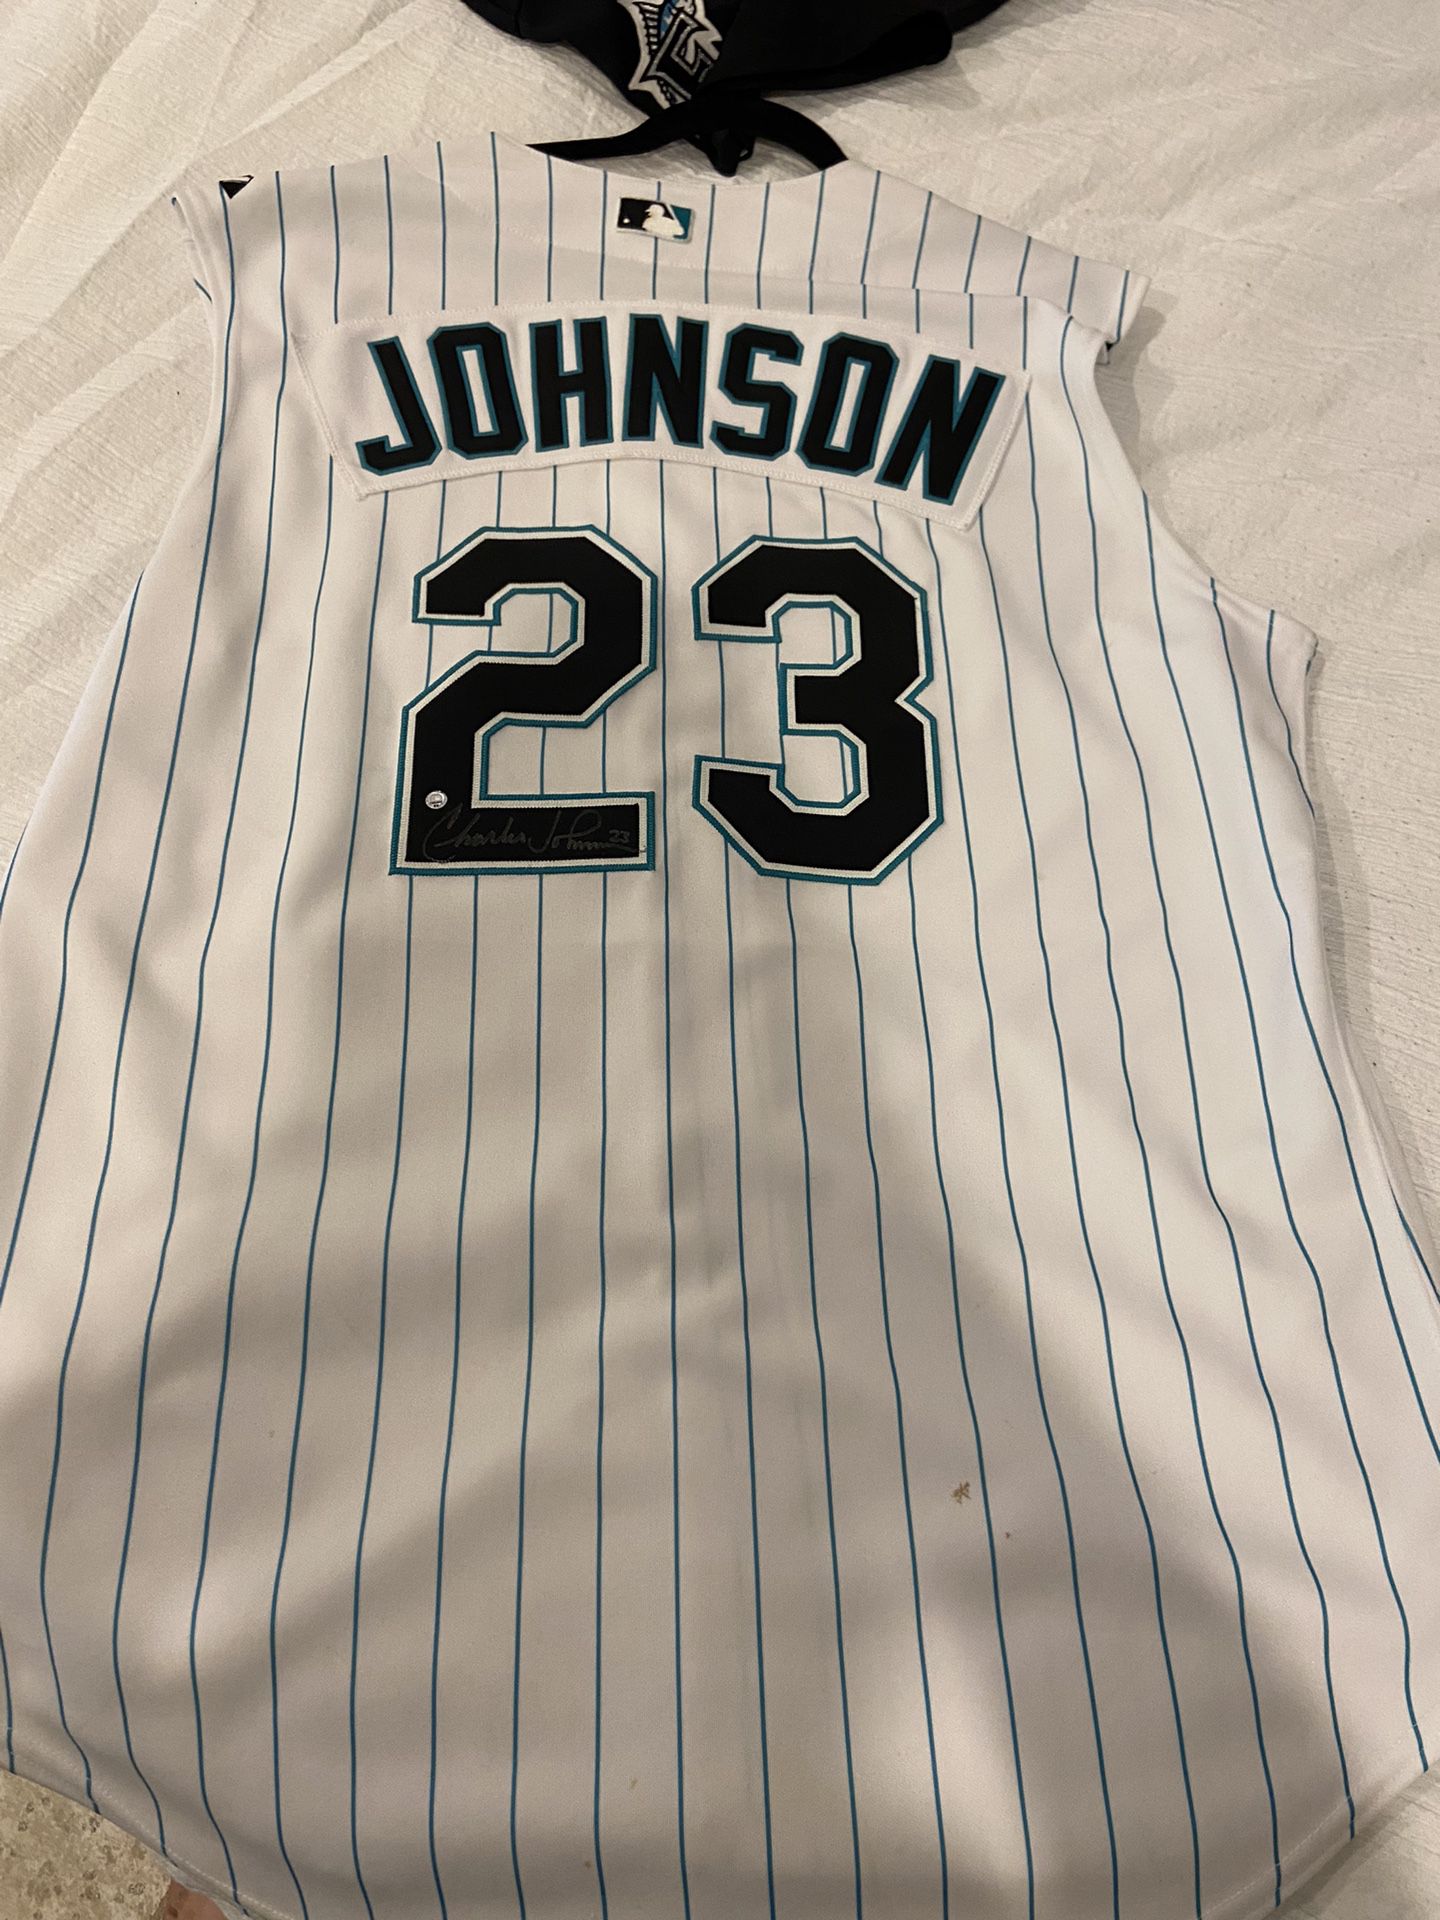 Charles Johnson Game Used Marlins Jersey Signed for Sale in Pompano Beach,  FL - OfferUp